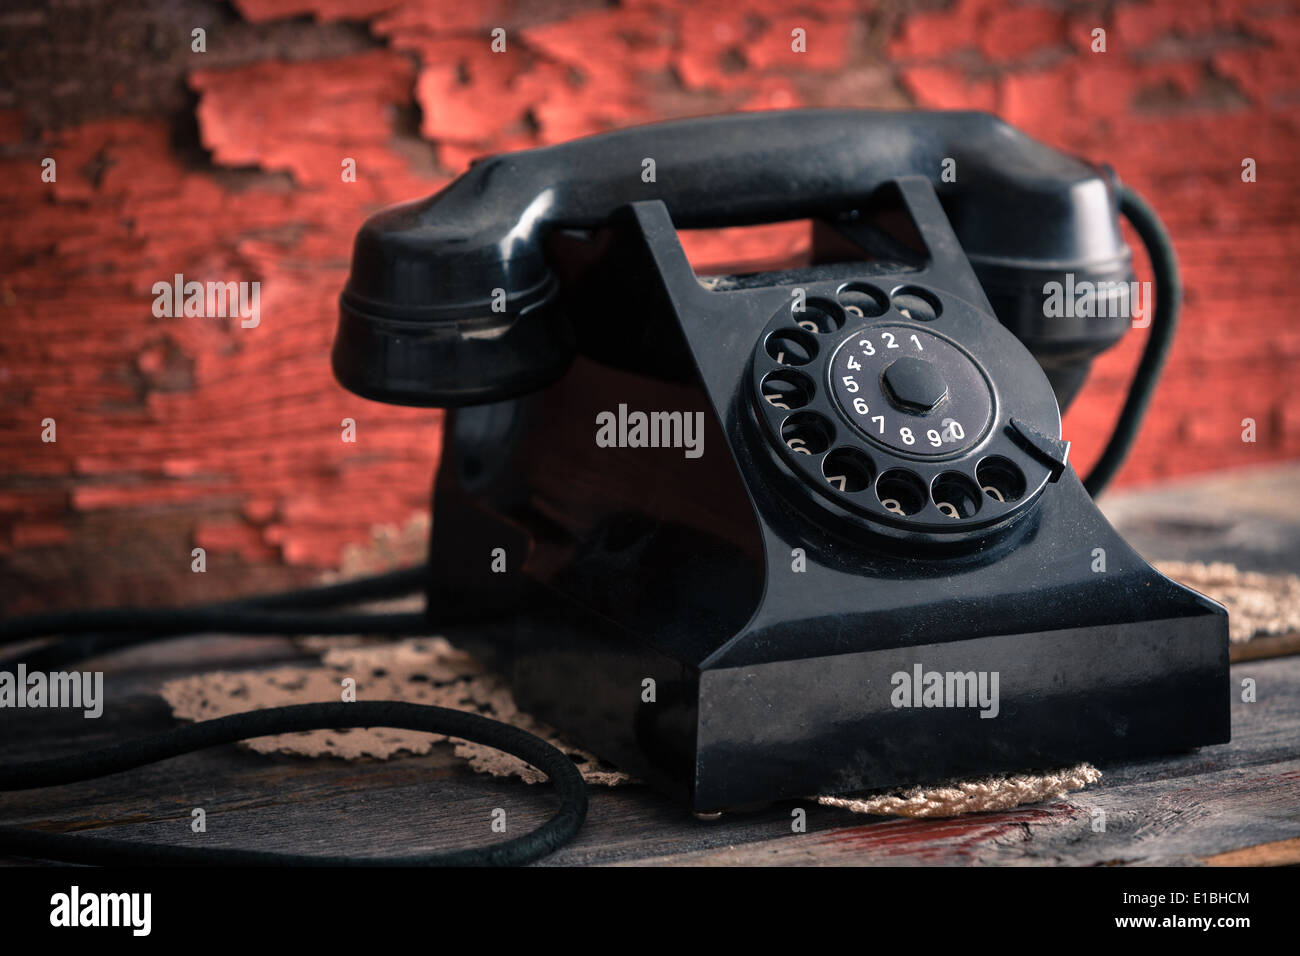 Close up side view of an old classic black dial-up rotary telephone against a grunge wooden wall with peeling red paint Stock Photo